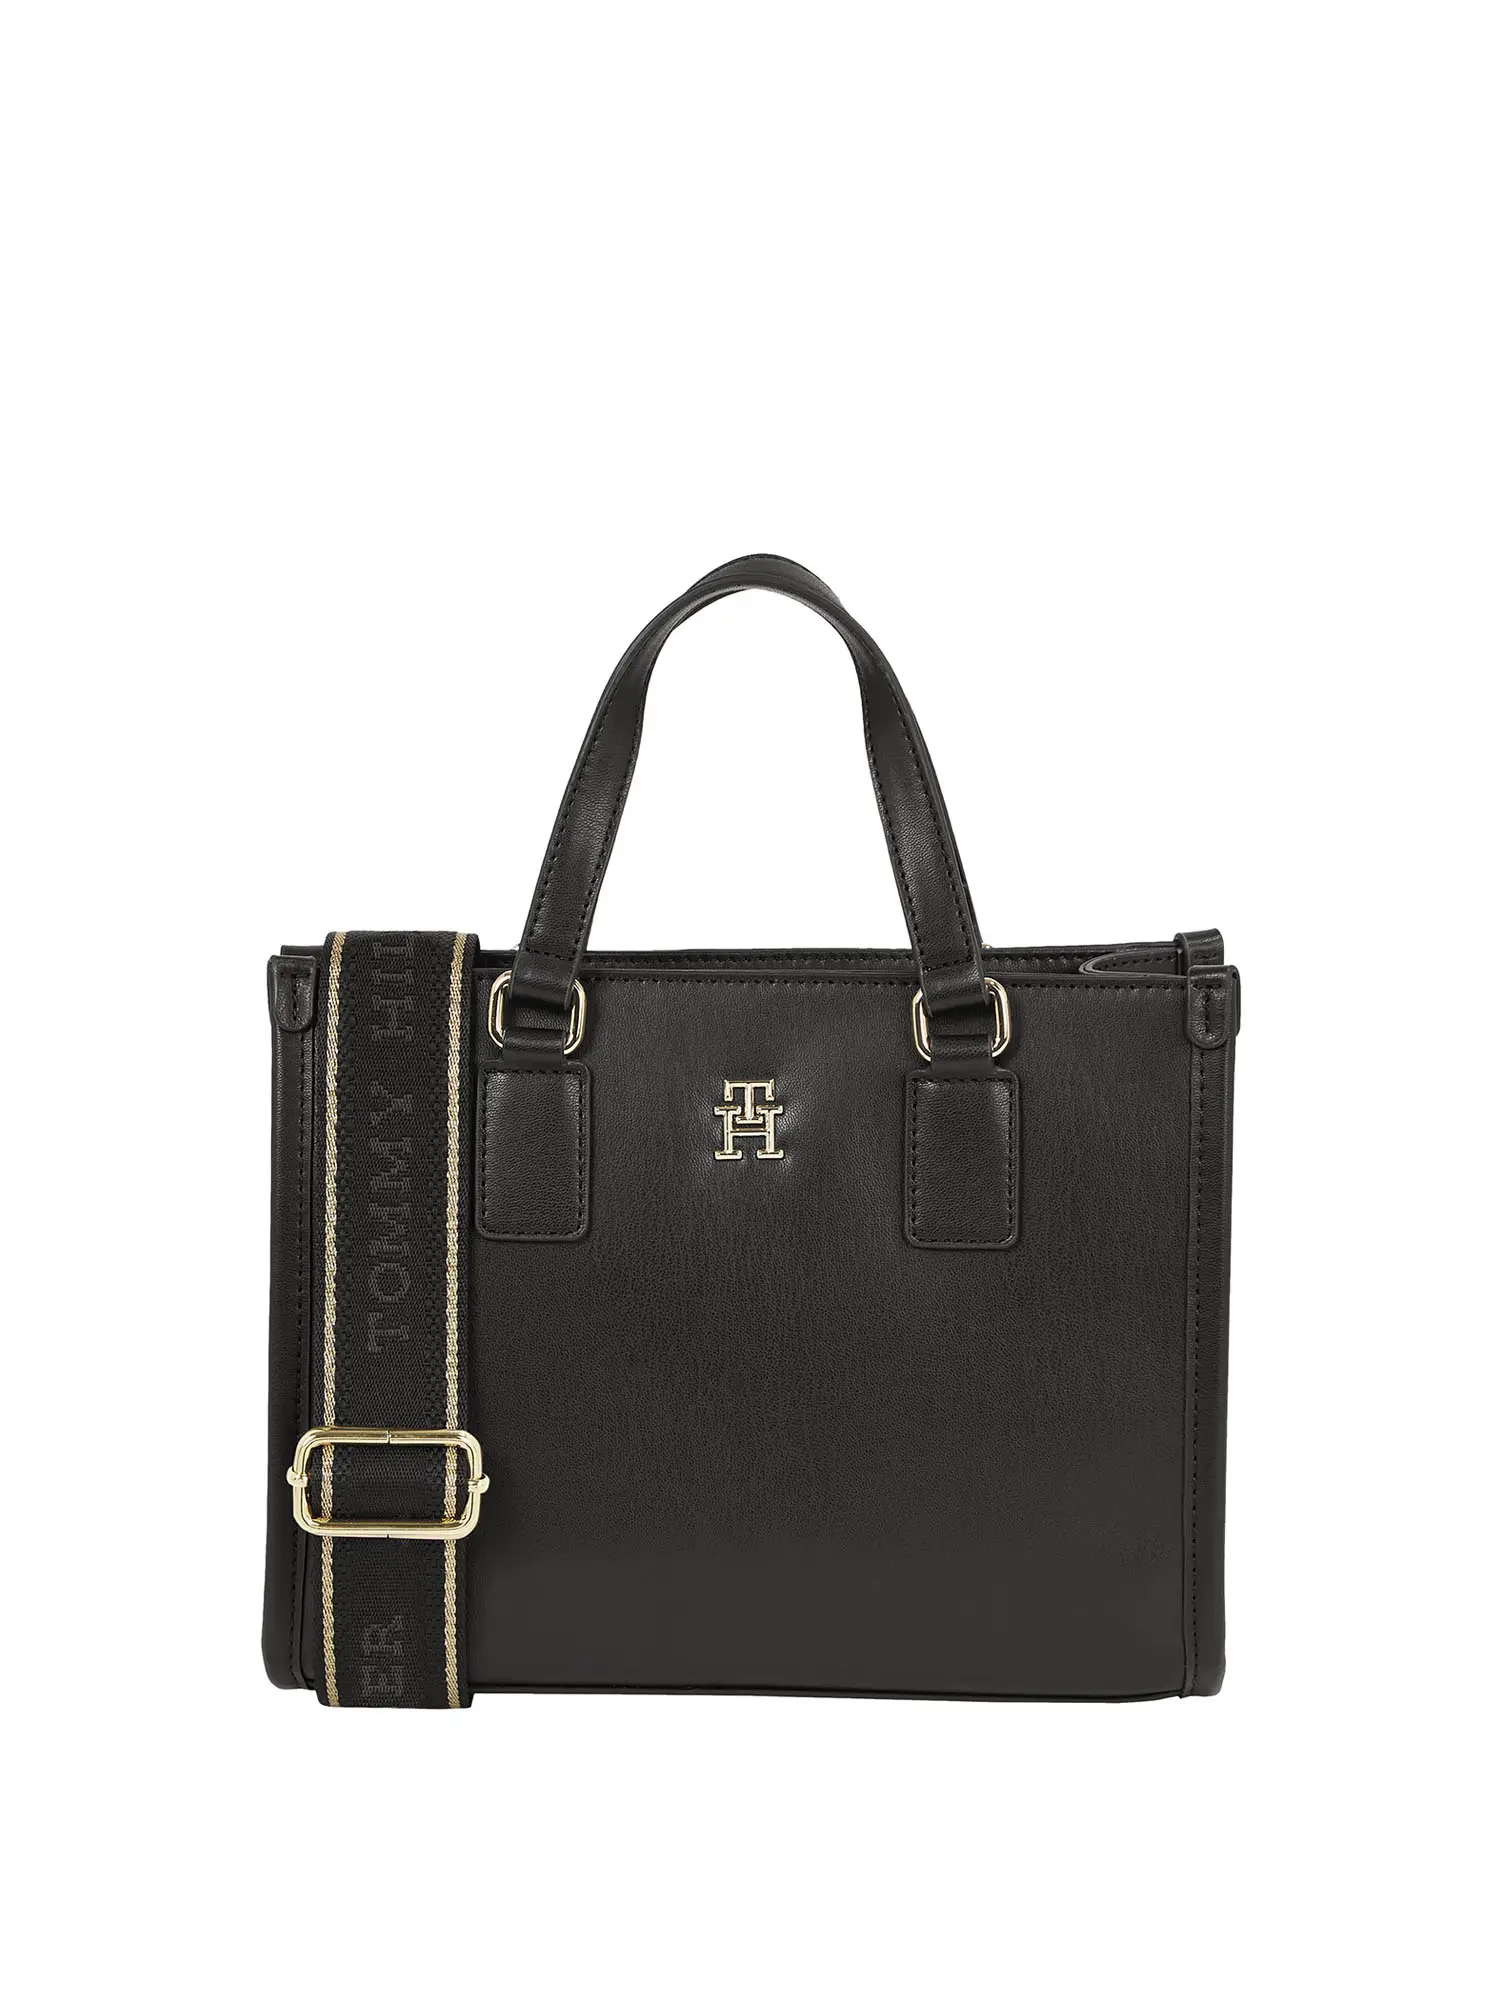 TOTE DONNA - TOMMY HILFIGER - AW0AW15977 - NERO, UNICA